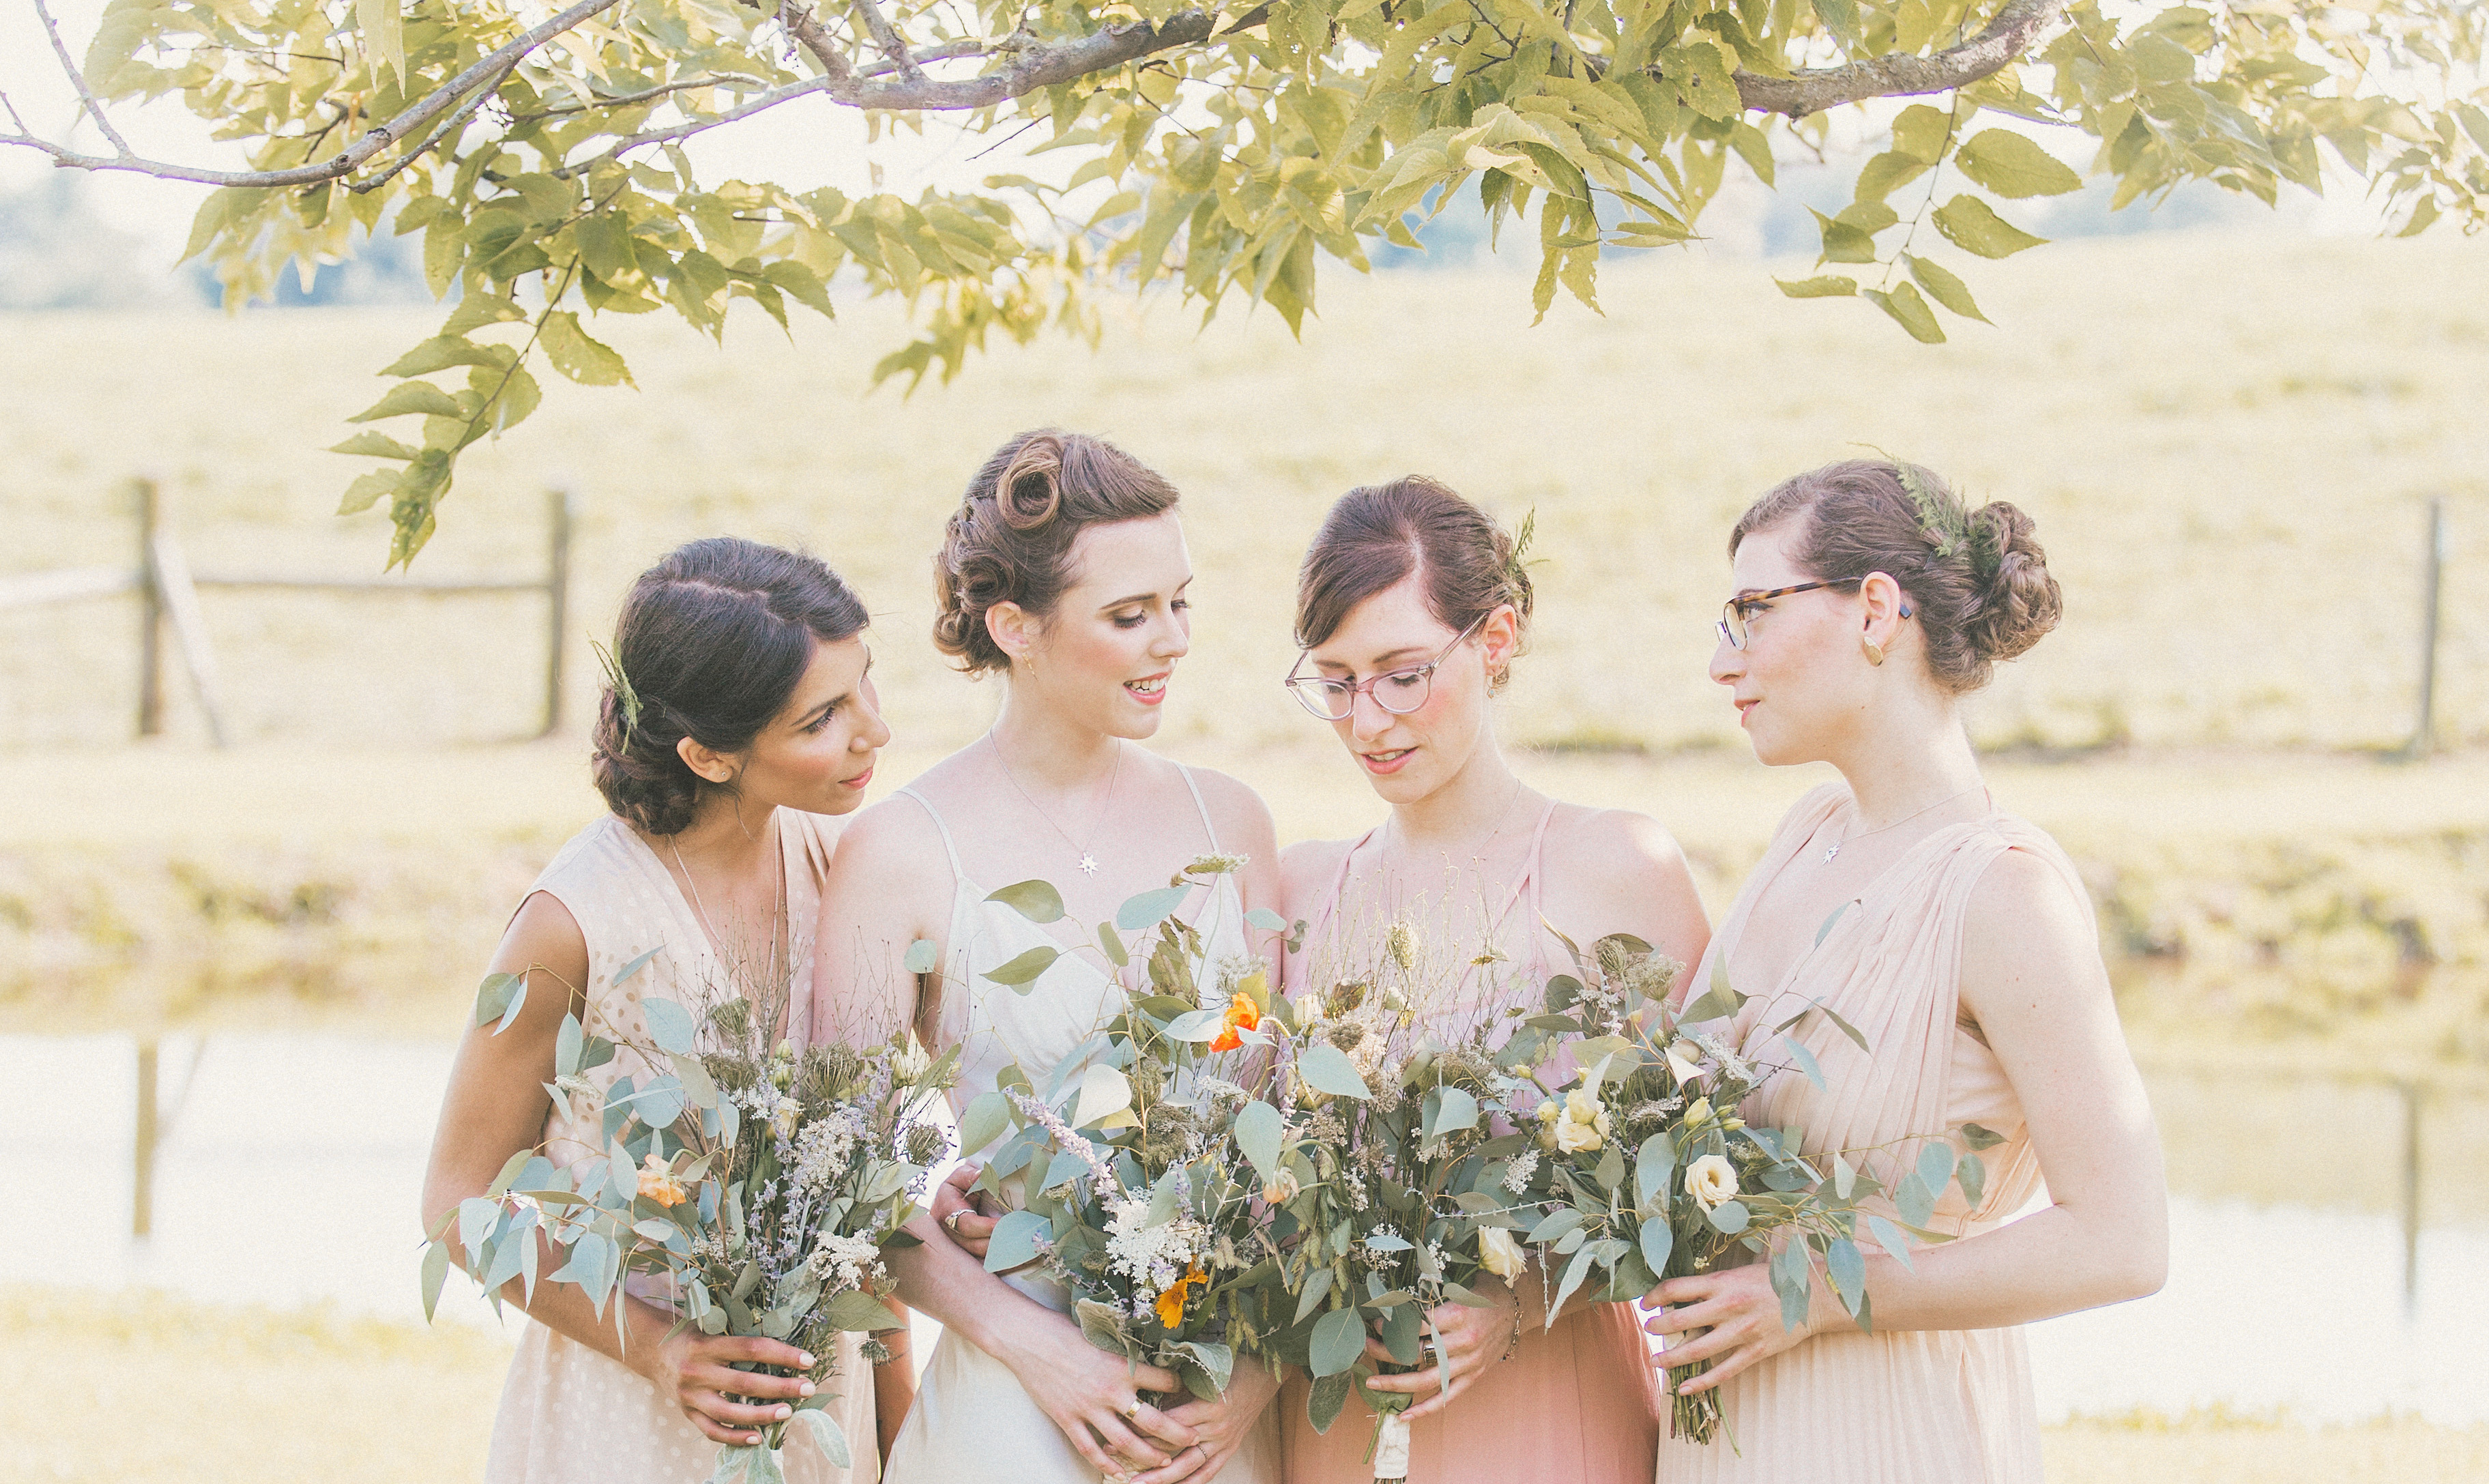 Wedding Inspiration, Photo by Cassie Lopez Photography